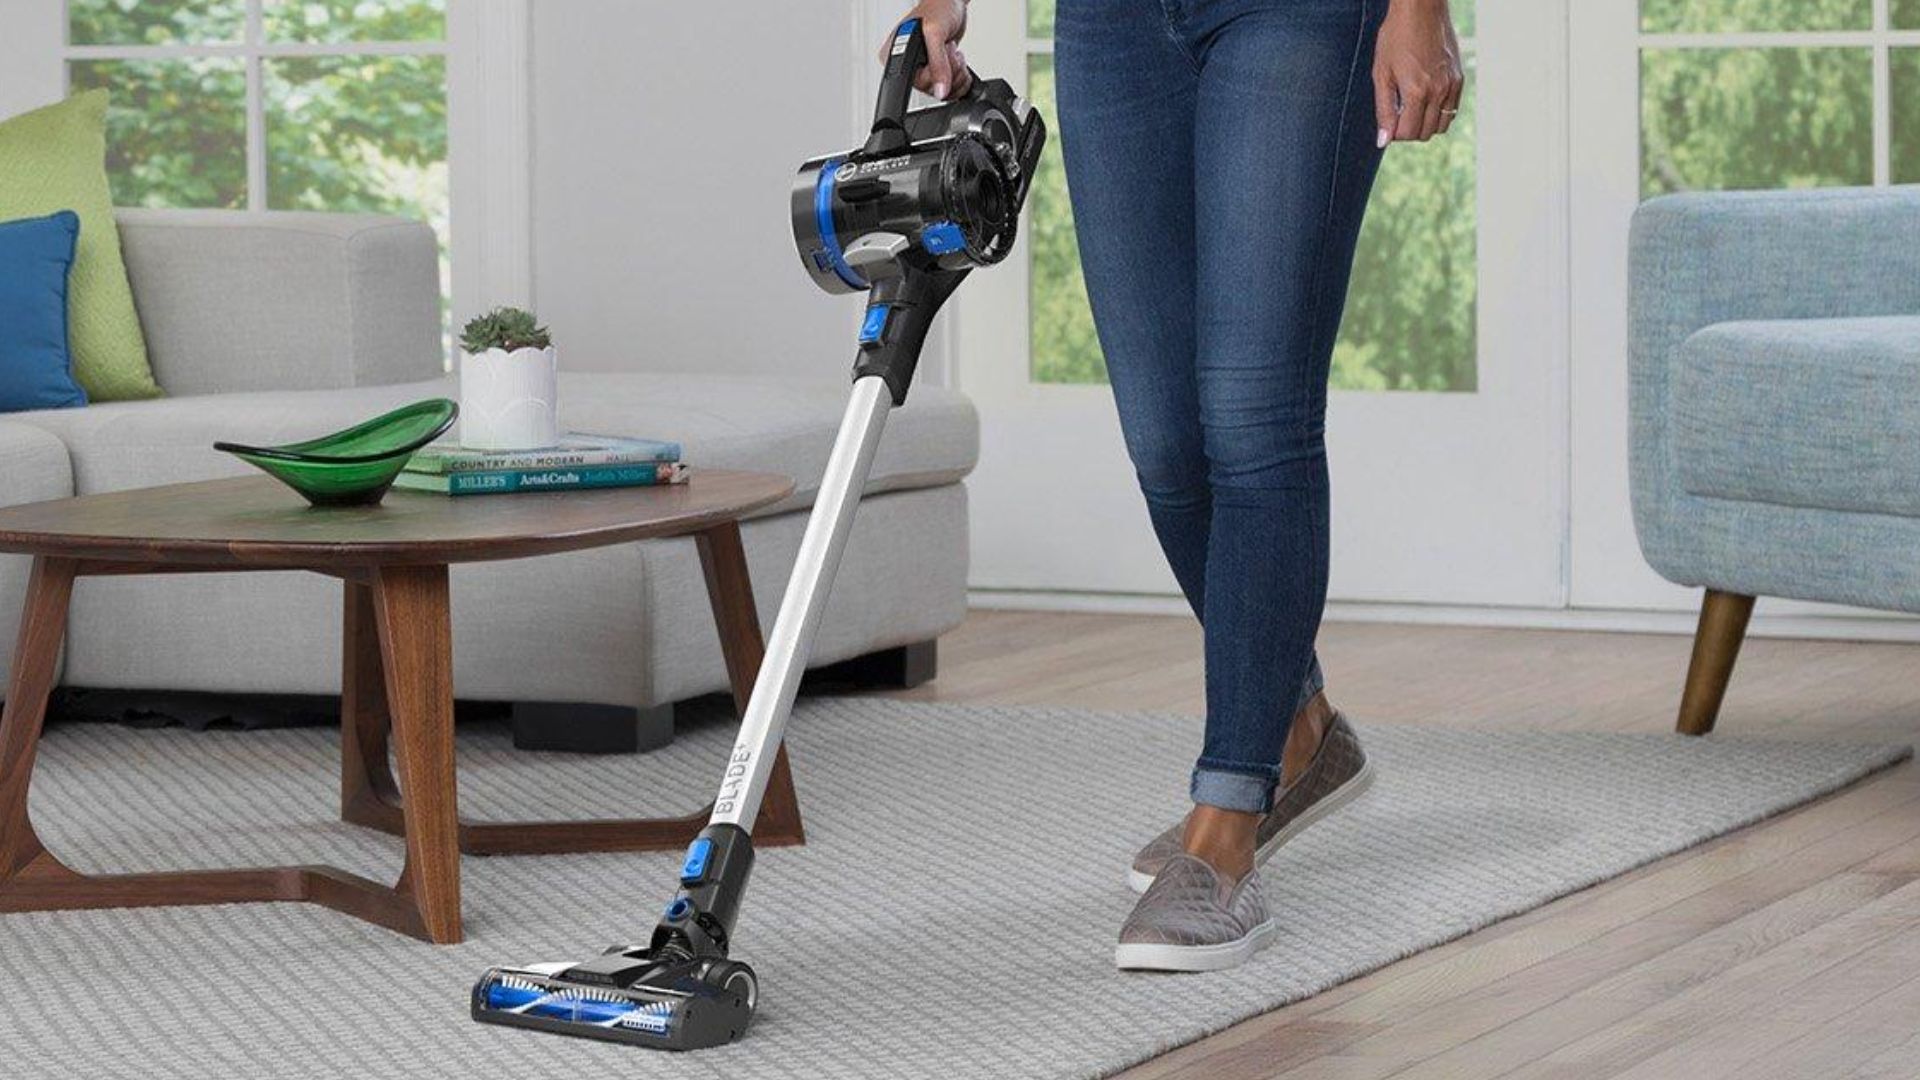 HOOVER ONEPWR Blade+ Cordless Stick Vacuum Cleaner with Removable